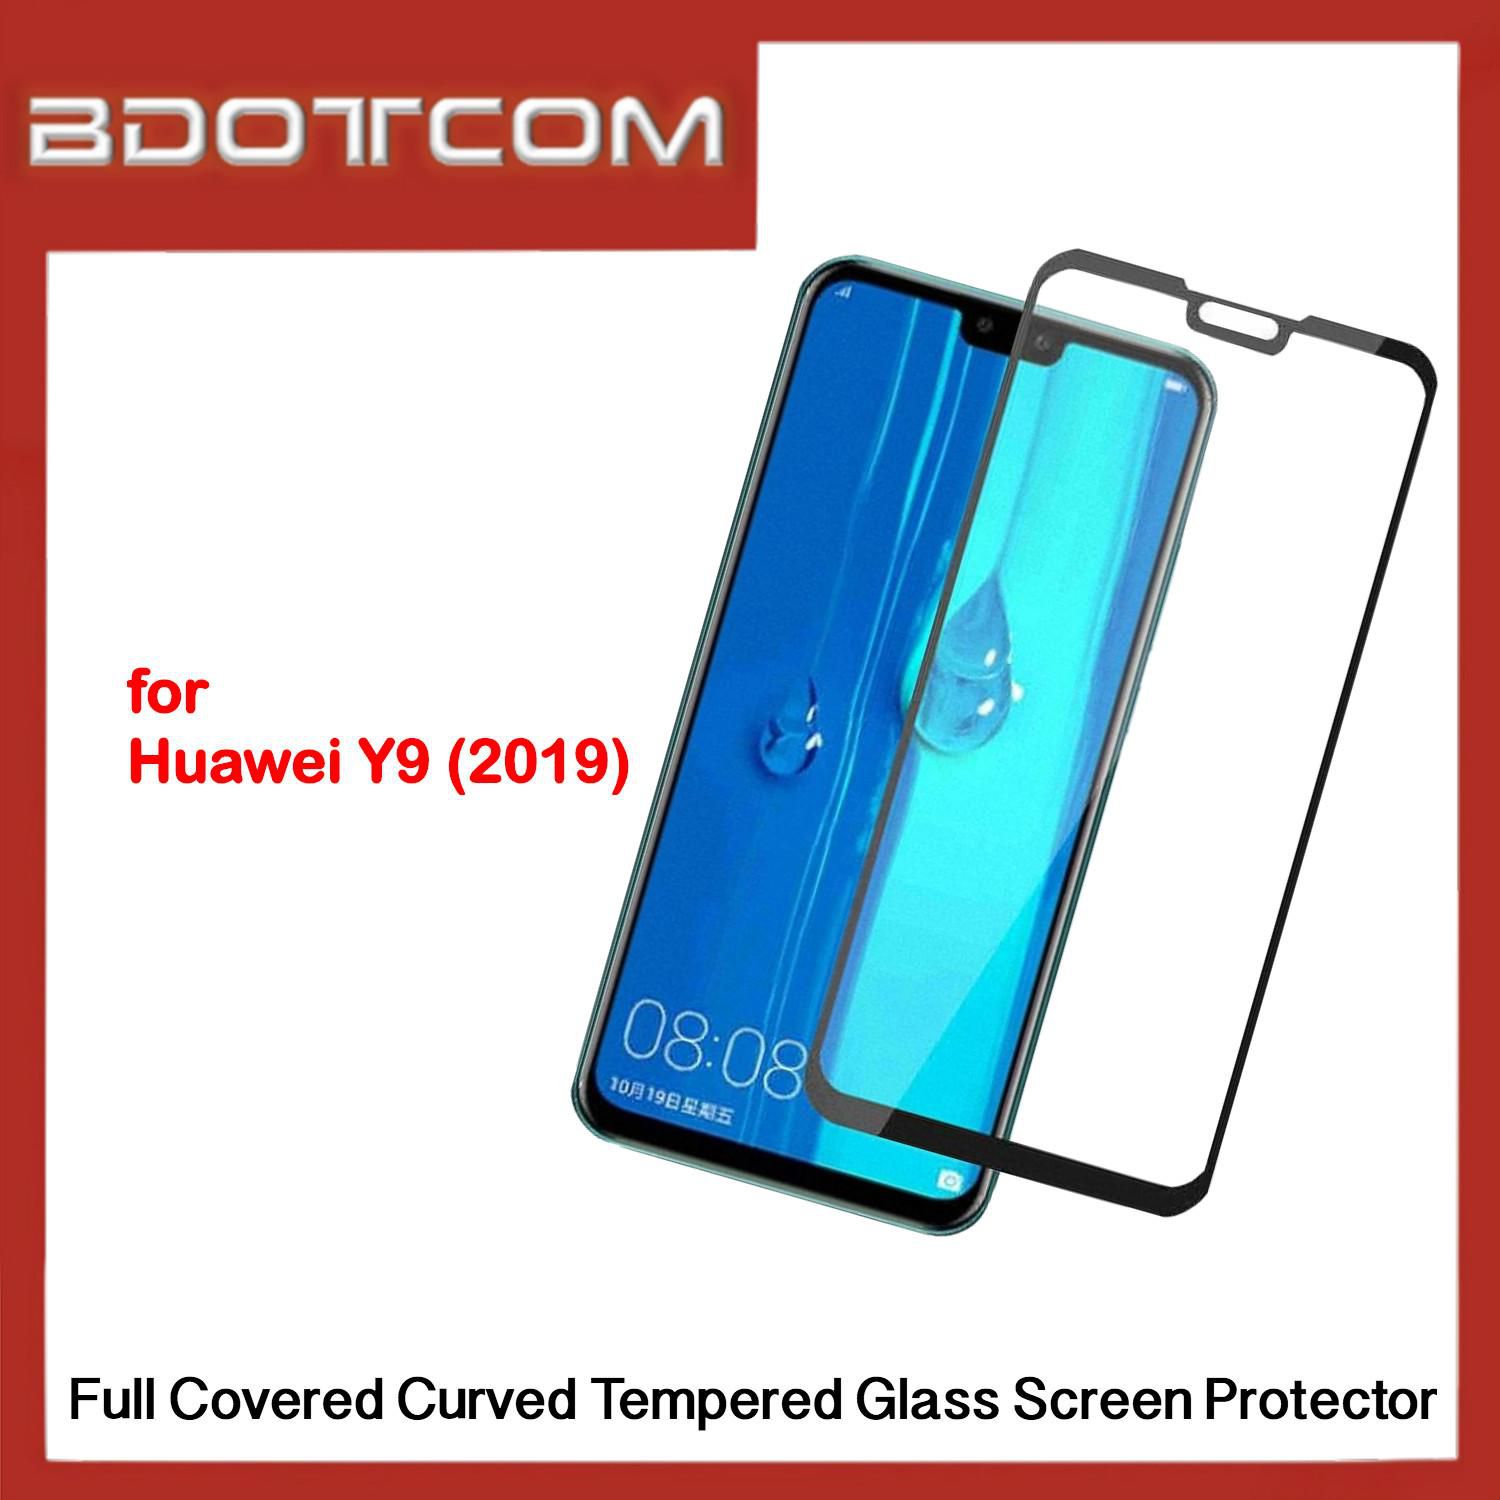 Bdotcom Full Covered Curved Glass Screen Protector for Huawei Y9 2019 (Black)